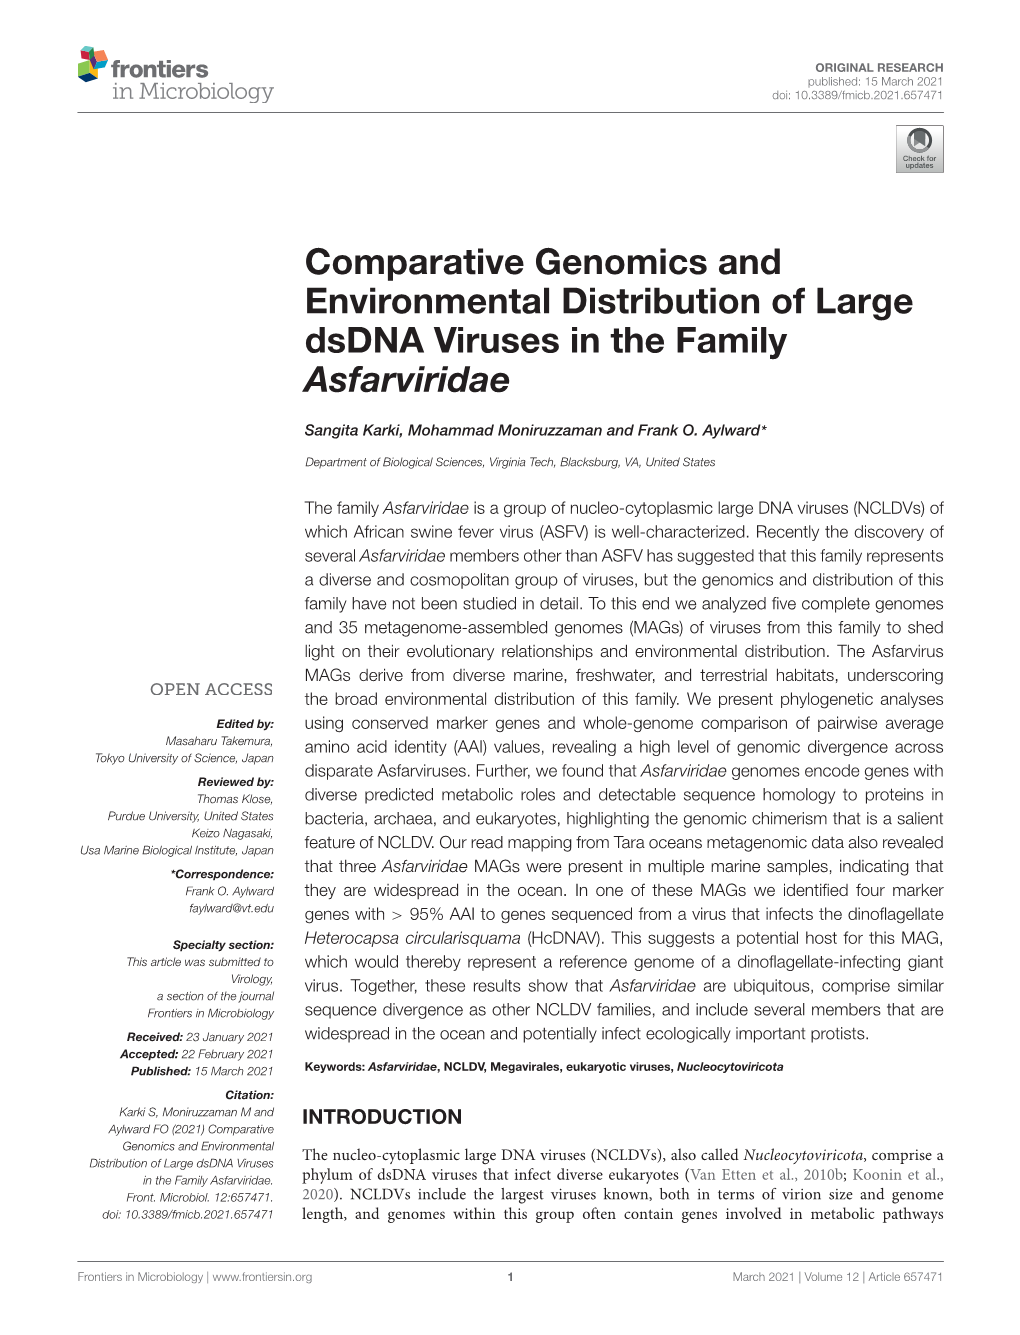 Comparative Genomics and Environmental Distribution of Large Dsdna Viruses in the Family Asfarviridae